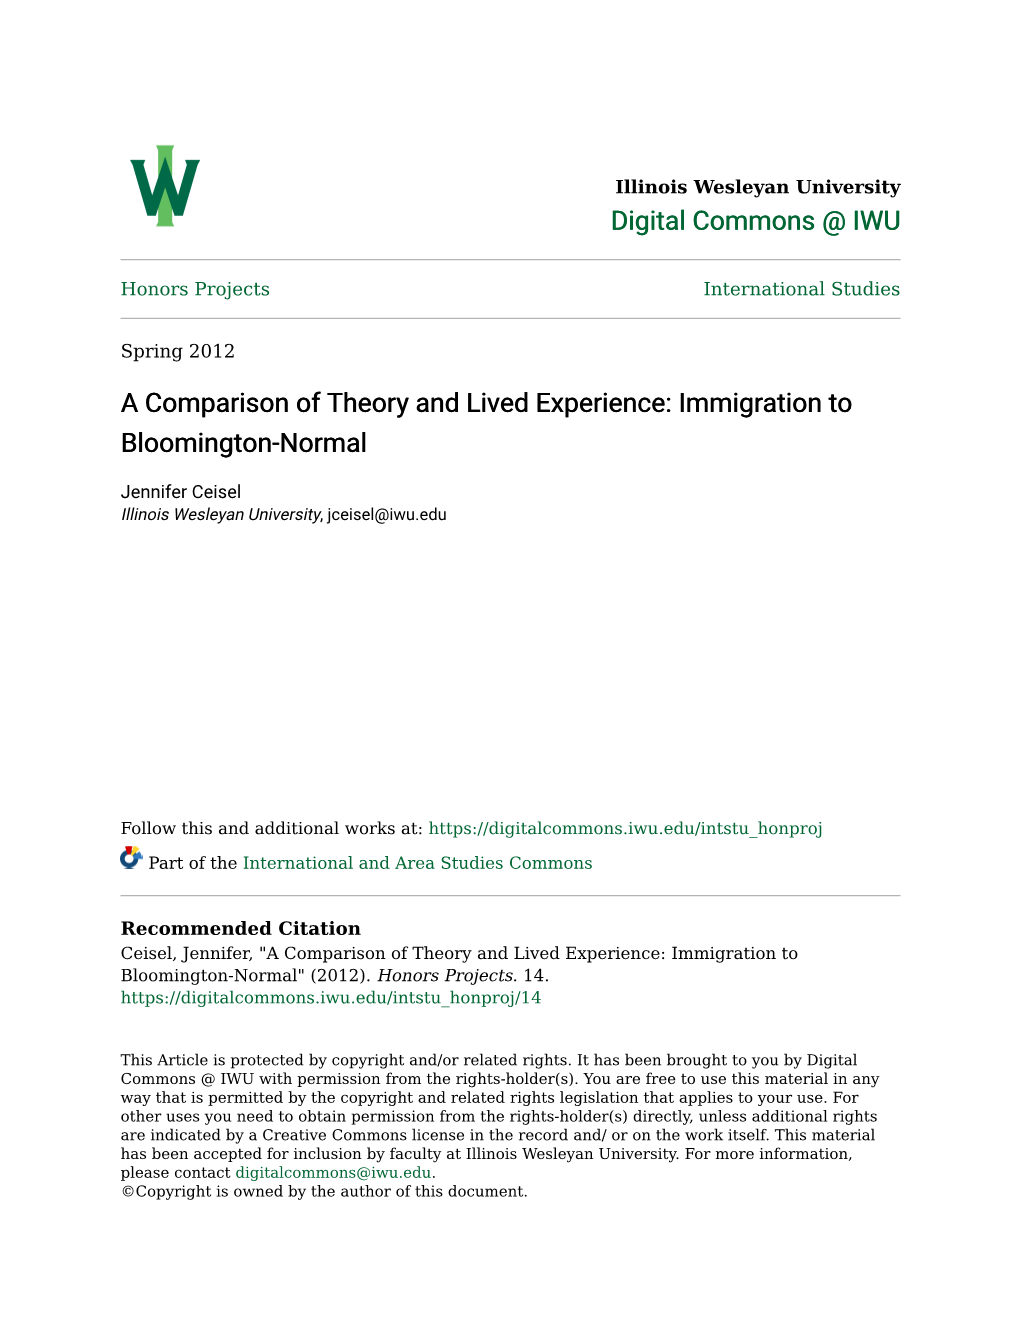 A Comparison of Theory and Lived Experience: Immigration to Bloomington-Normal